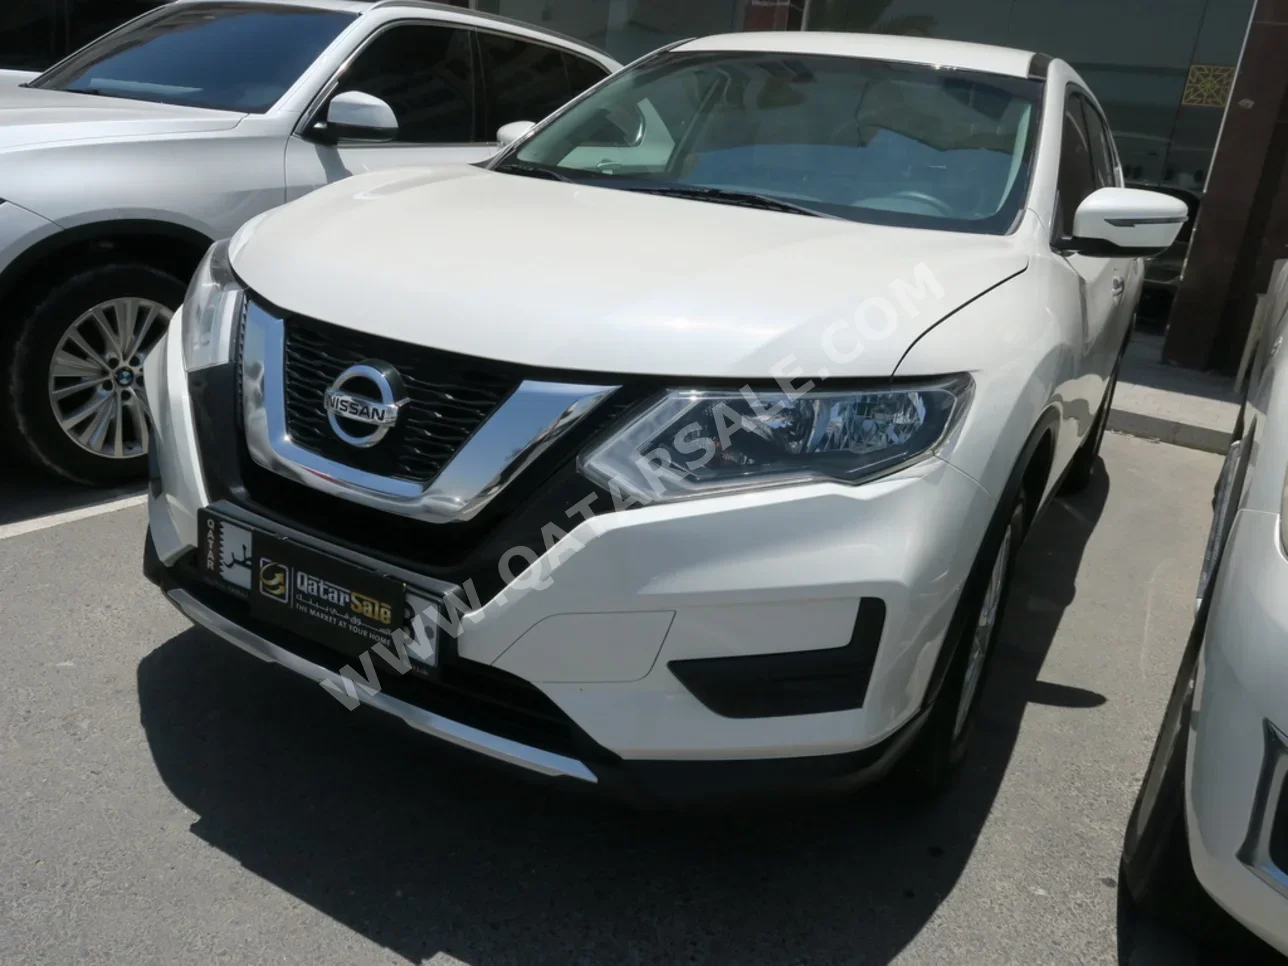 Nissan  X-Trail  2020  Automatic  90,000 Km  4 Cylinder  Four Wheel Drive (4WD)  SUV  White